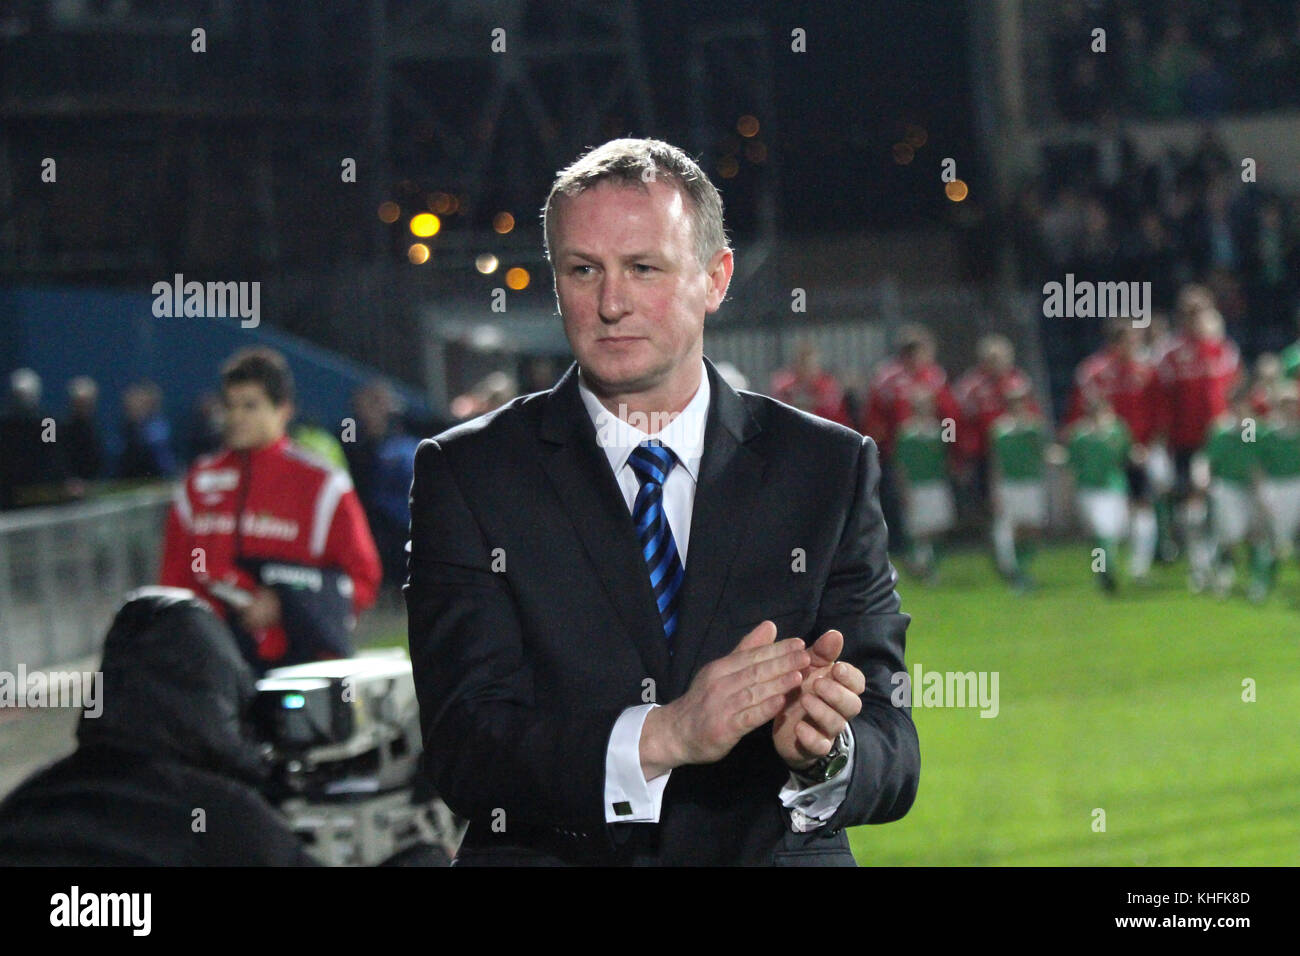 Michael O'Neill's first game in charge of Northern Ireland. O'Neill succeeded Nigel Worthington and his first game was at home to Norway on 29 February 2012 at Windsor Park Belfast. Here he applauds the home fans on his way to the dugout. Stock Photo